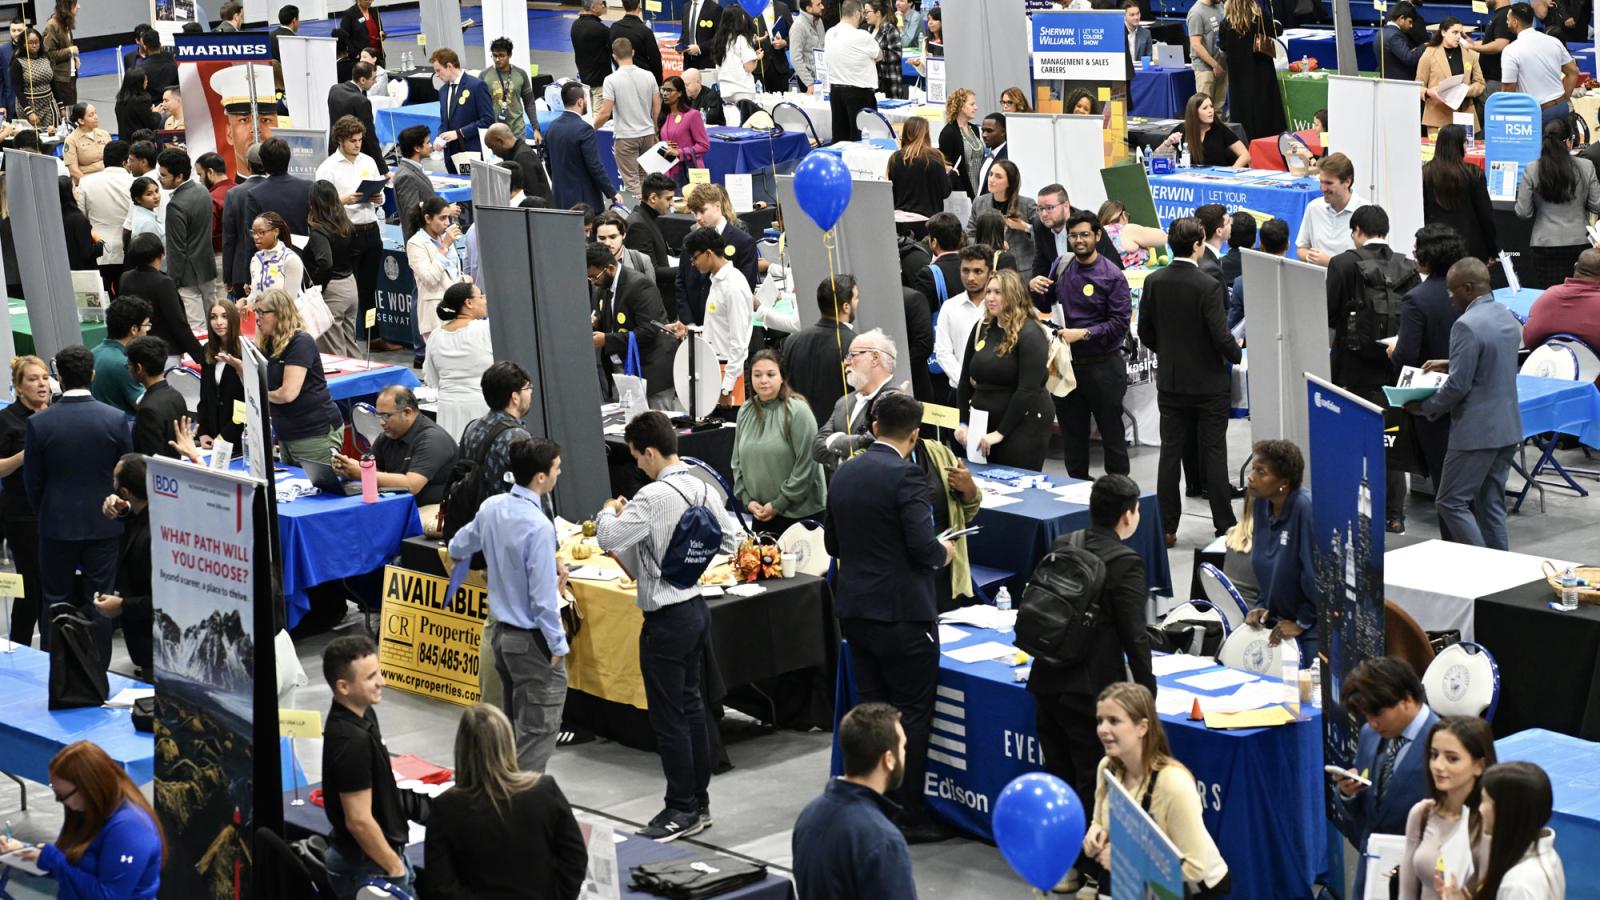 overhead view of the pace university gym during a career fair with a lot of people and display tables. 